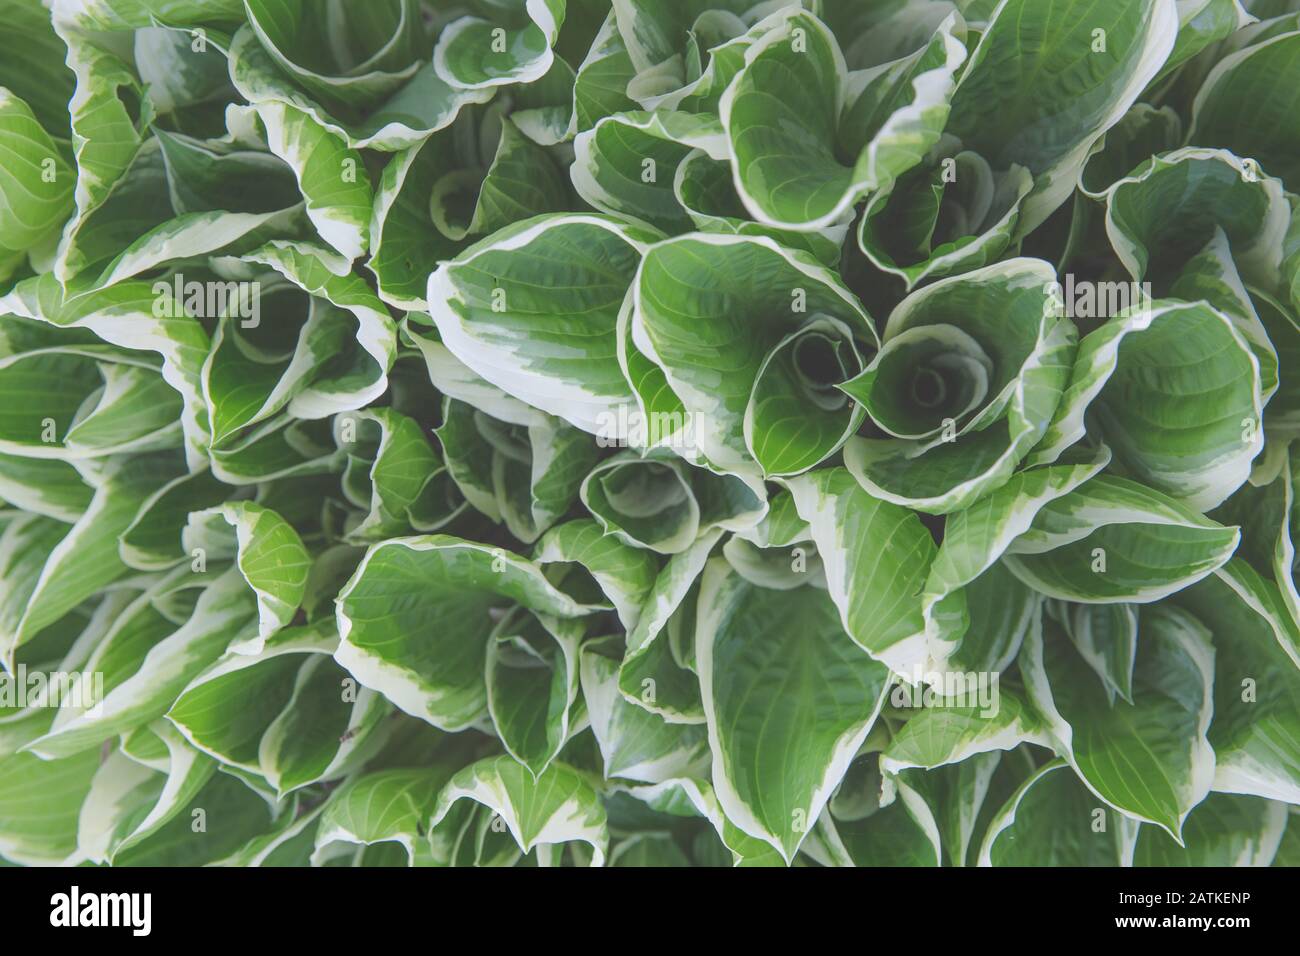 Looking down on veriegated hostas as they open up, with matte finish Stock Photo